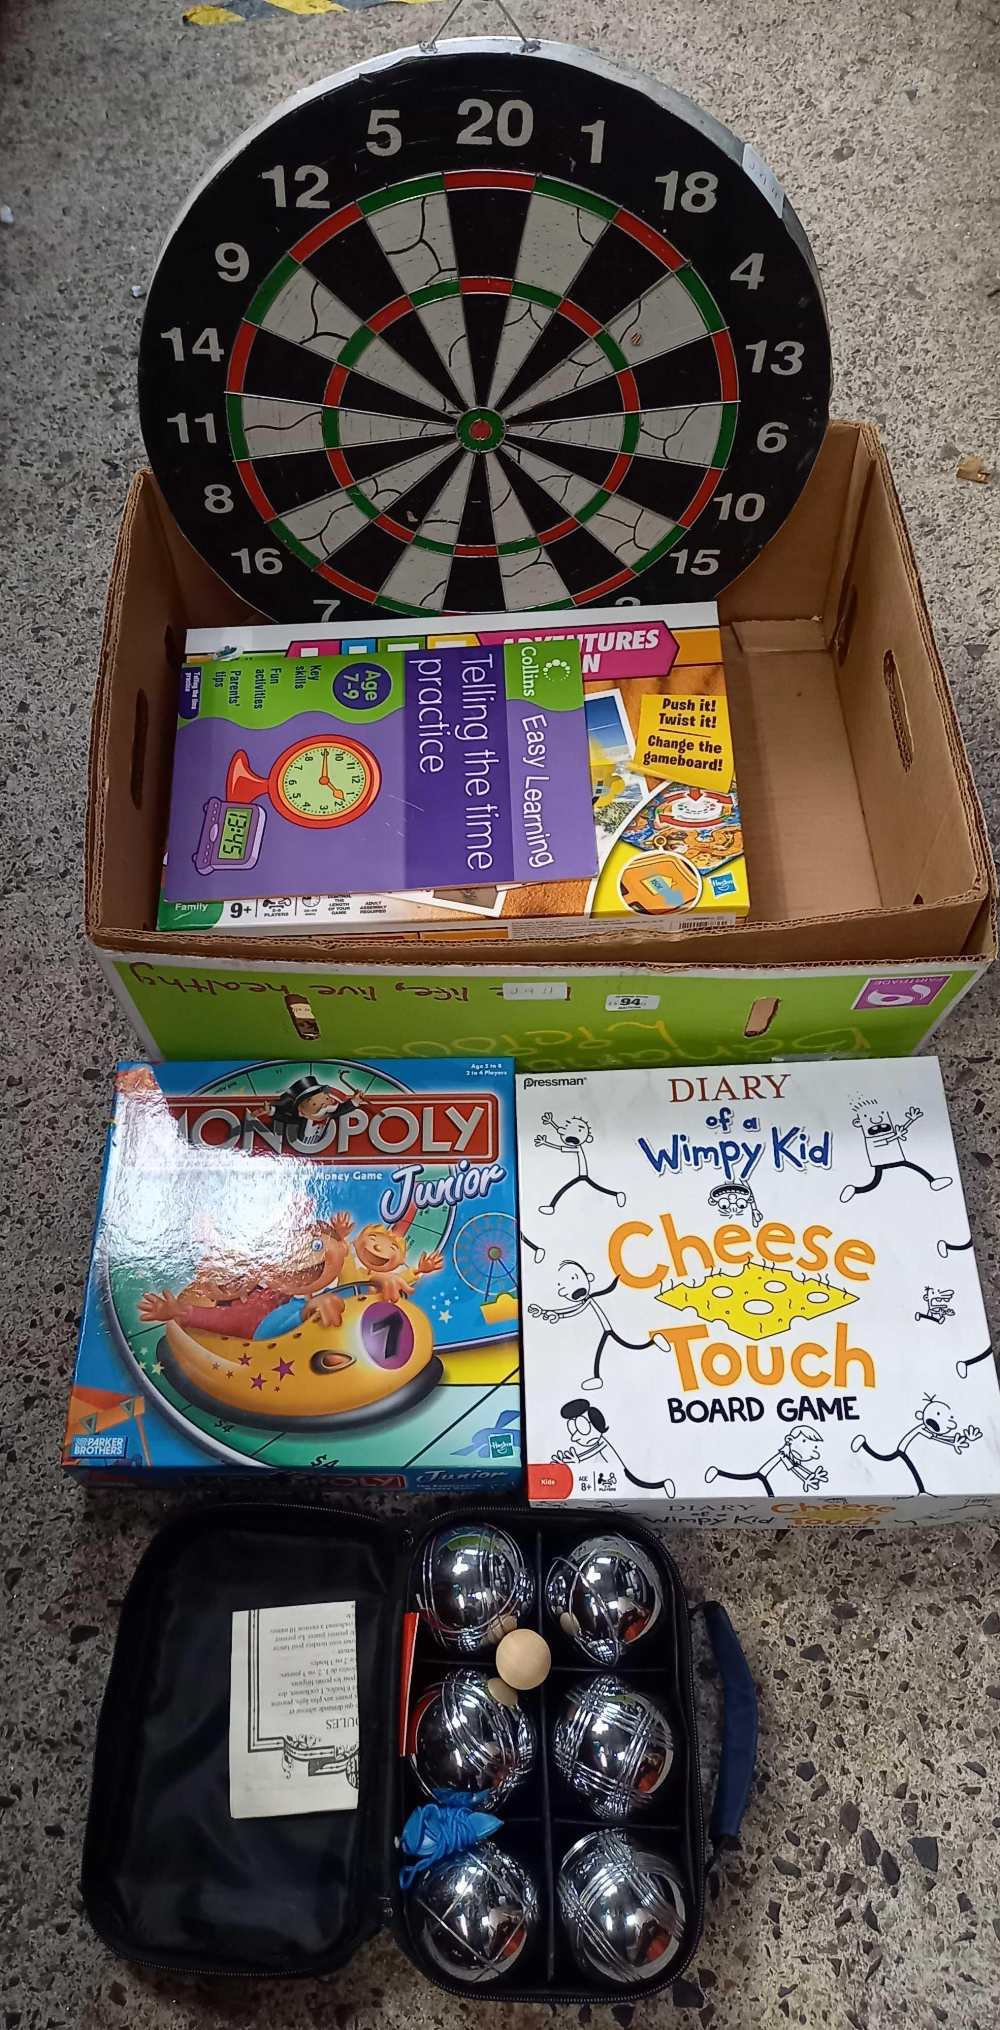 CARTON WITH CHILDREN'S GAMES MONOPOLY, WHIMPY KID,